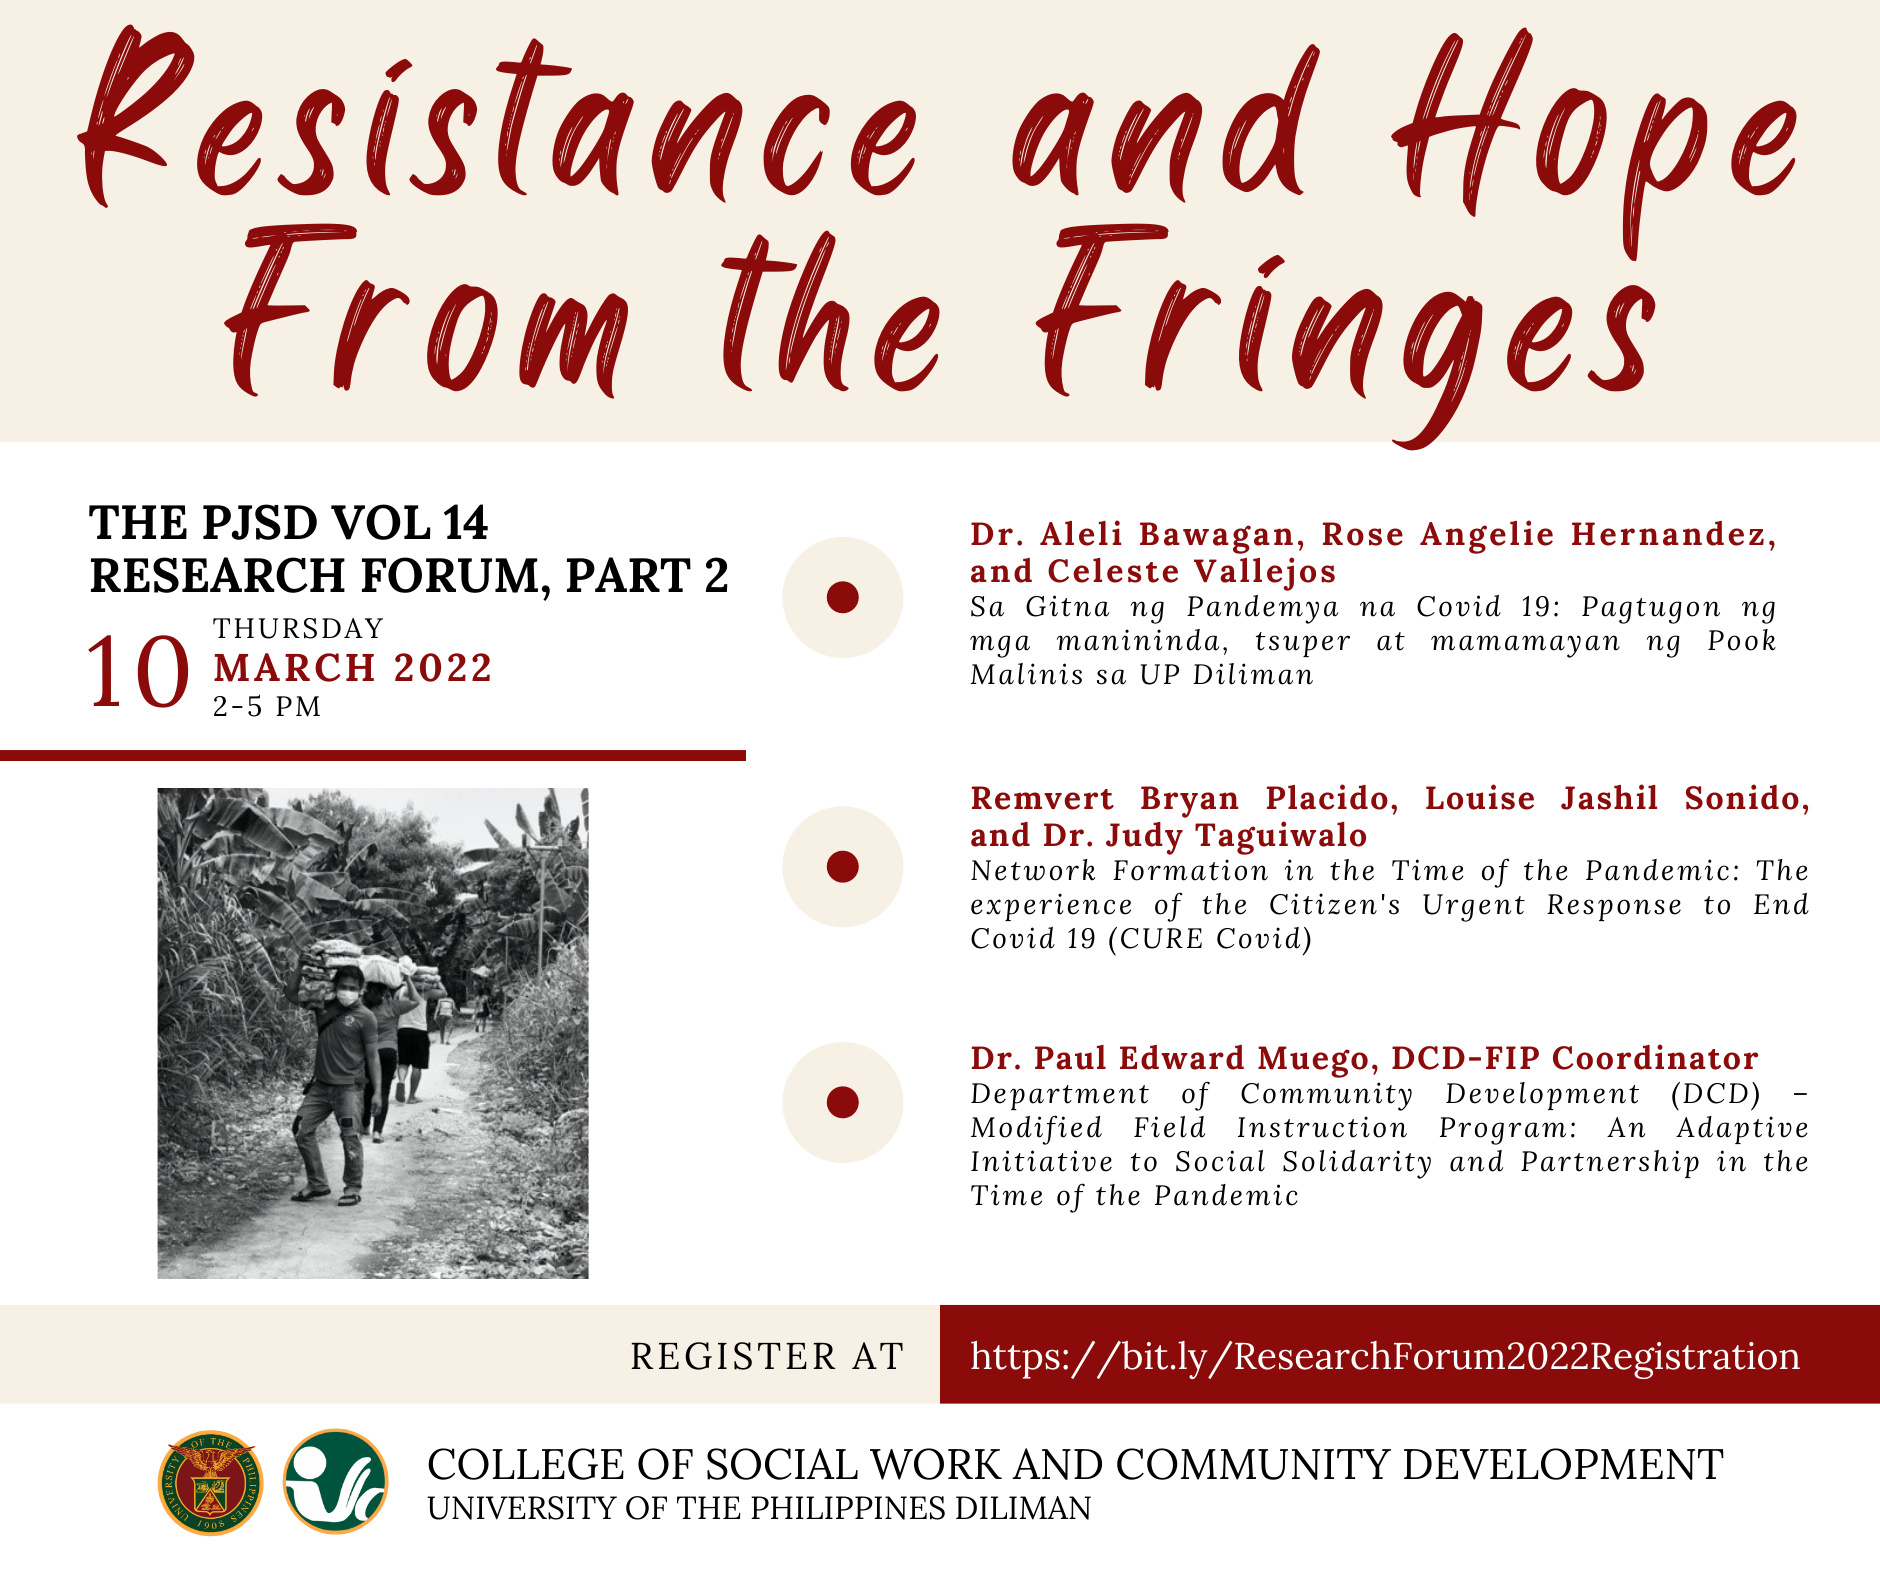 PJSD 14 Research Forum: Resistance and Hope from the Fringes